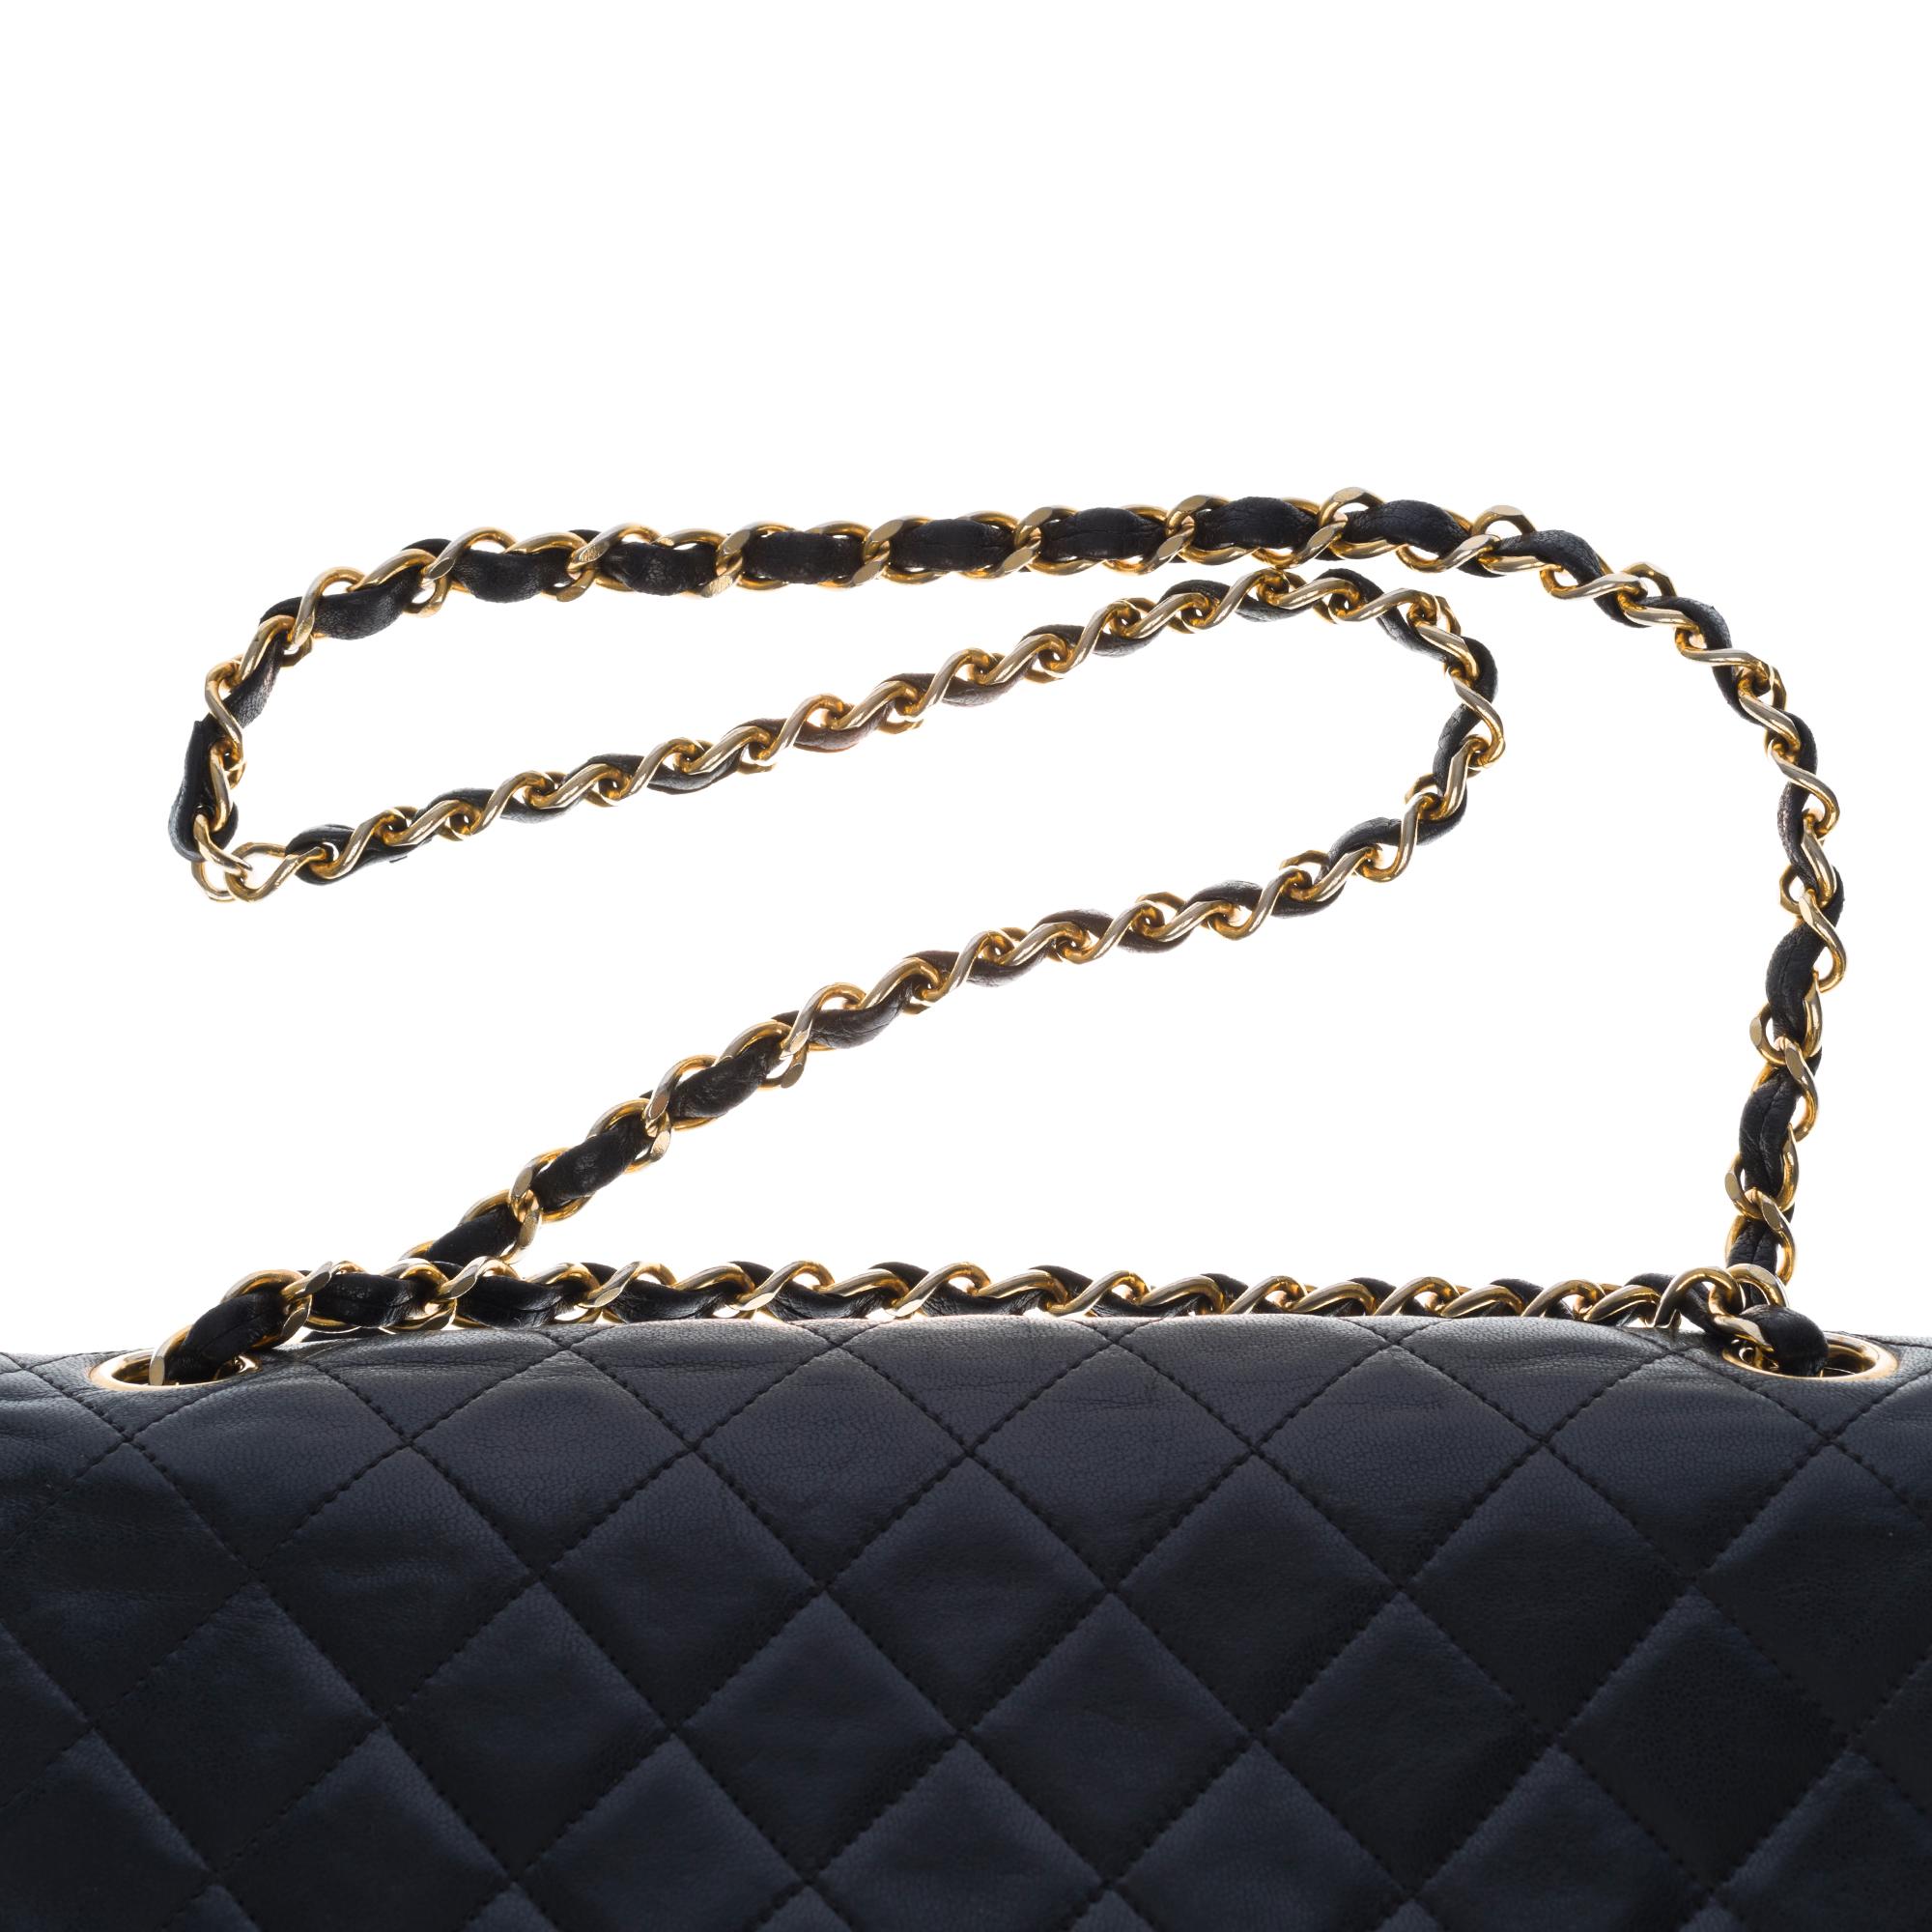 Chanel Timeless Medium Double Flap Shoulder bag in black quilted lambskin, GHW 3